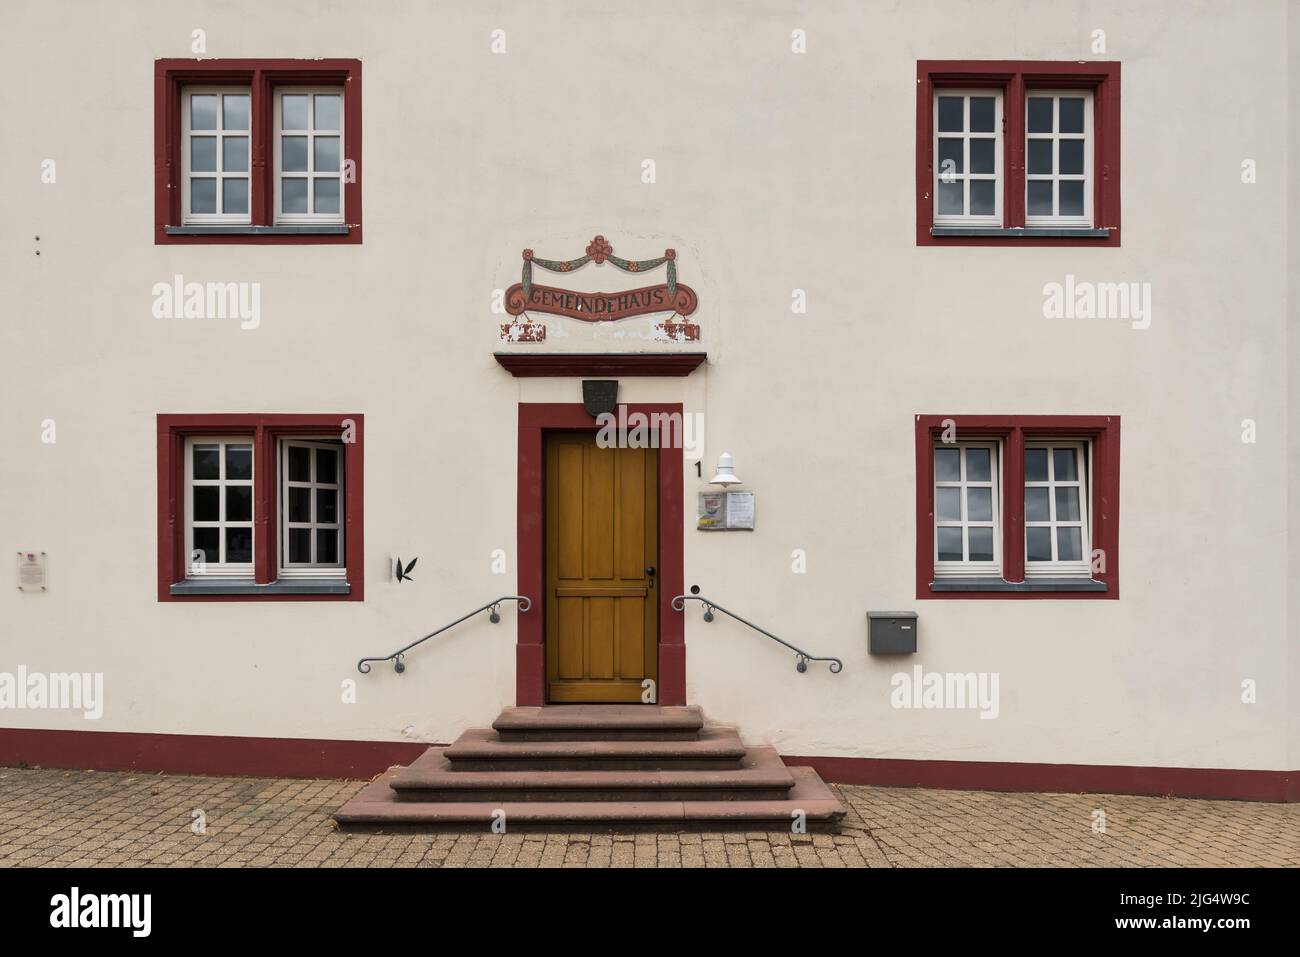 Welschbillig, Rhineland-Palatinate - Germany - 08 08 2020 Traditional cosy decorated house in German style Stock Photo